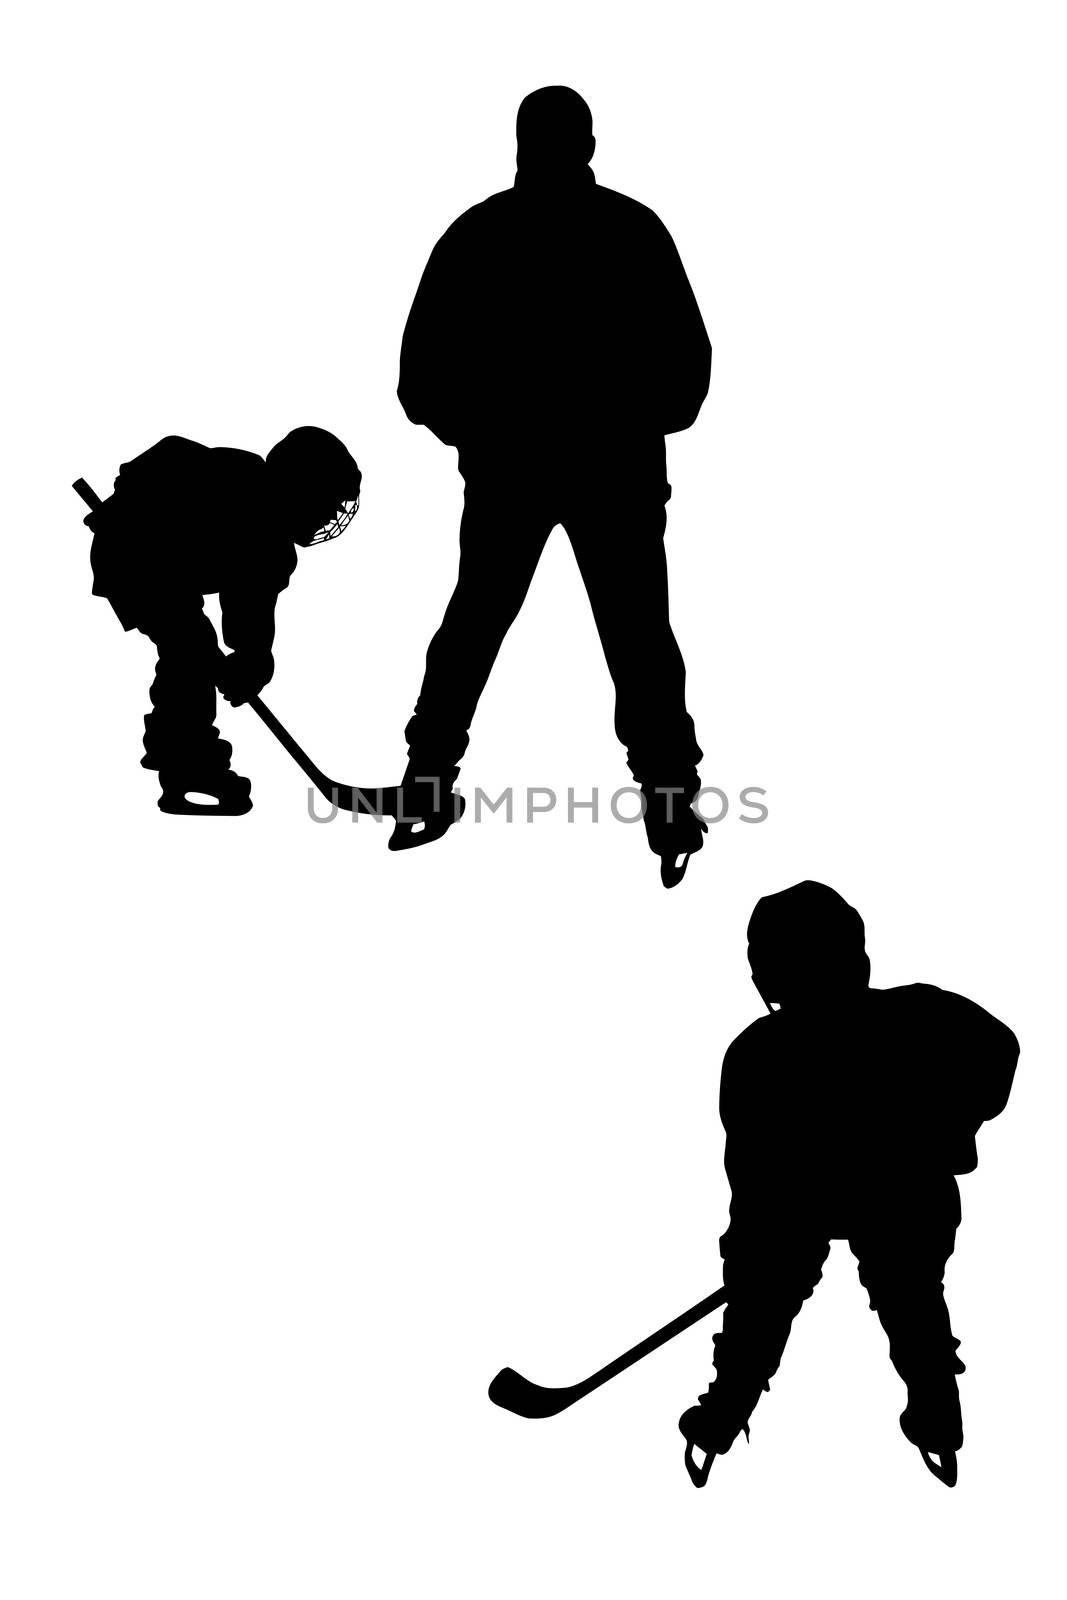  Silhouettes of two hockey players, isolated on white background.